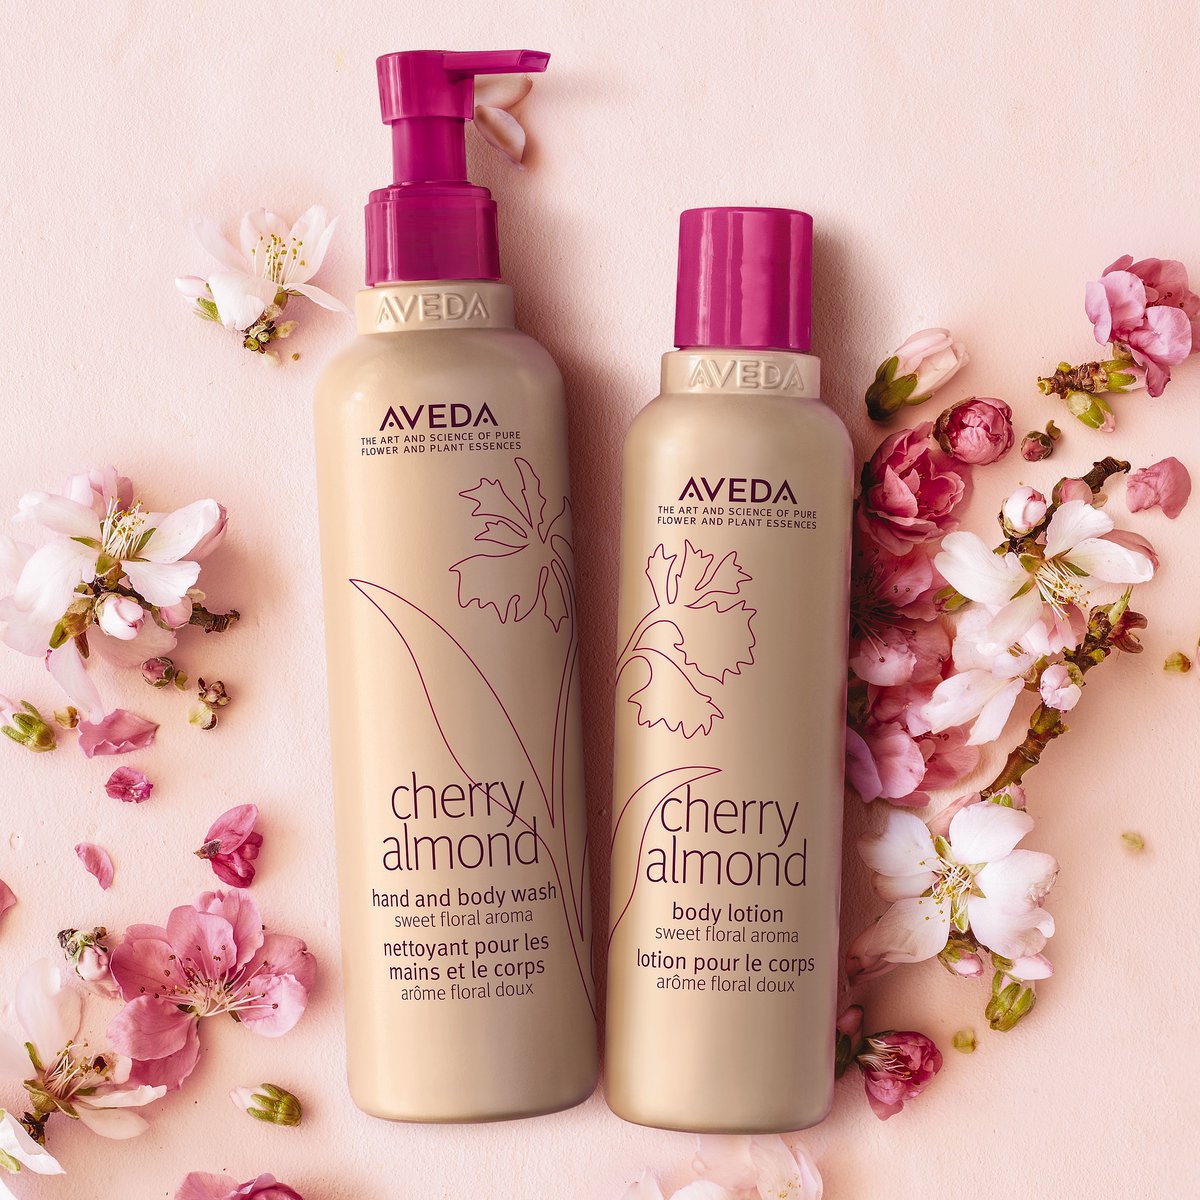 Feel sweet and soft from head to toe with NEW #CherryAlmond Body Lotion and Hand & Body Wash! #SmellsLikeAveda